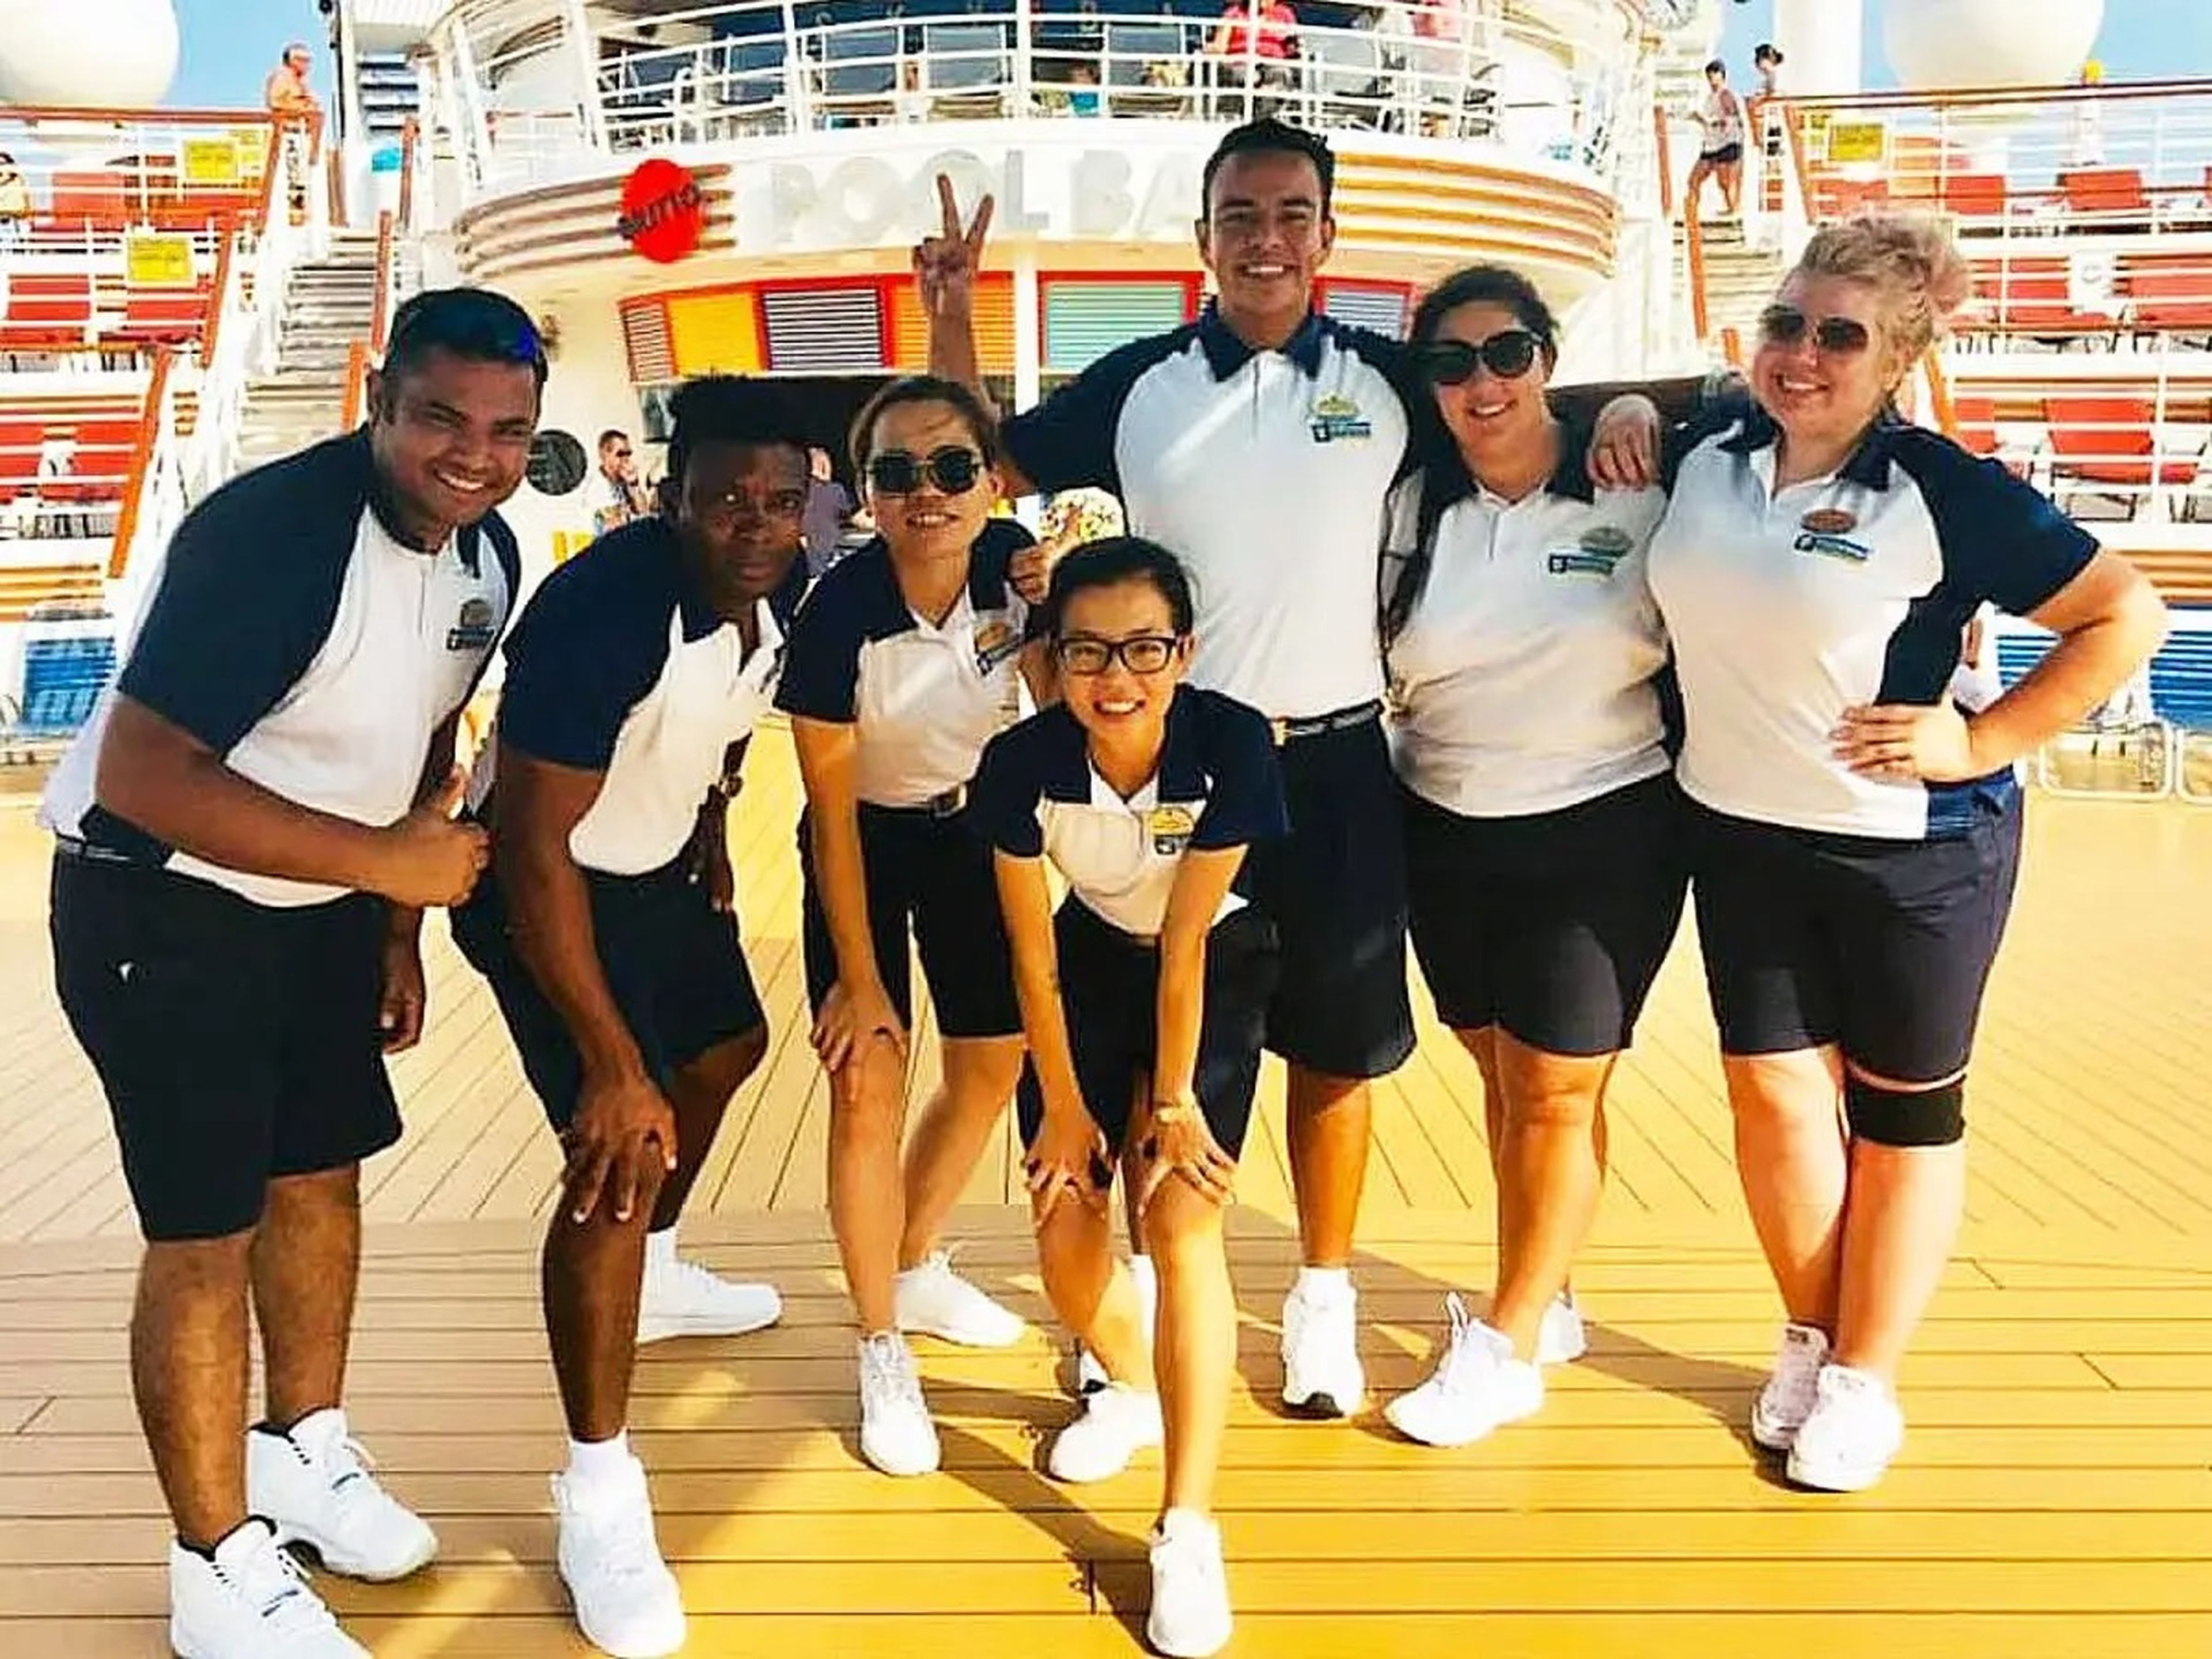 cruise ship staff posing for a photo on the deck of the ship